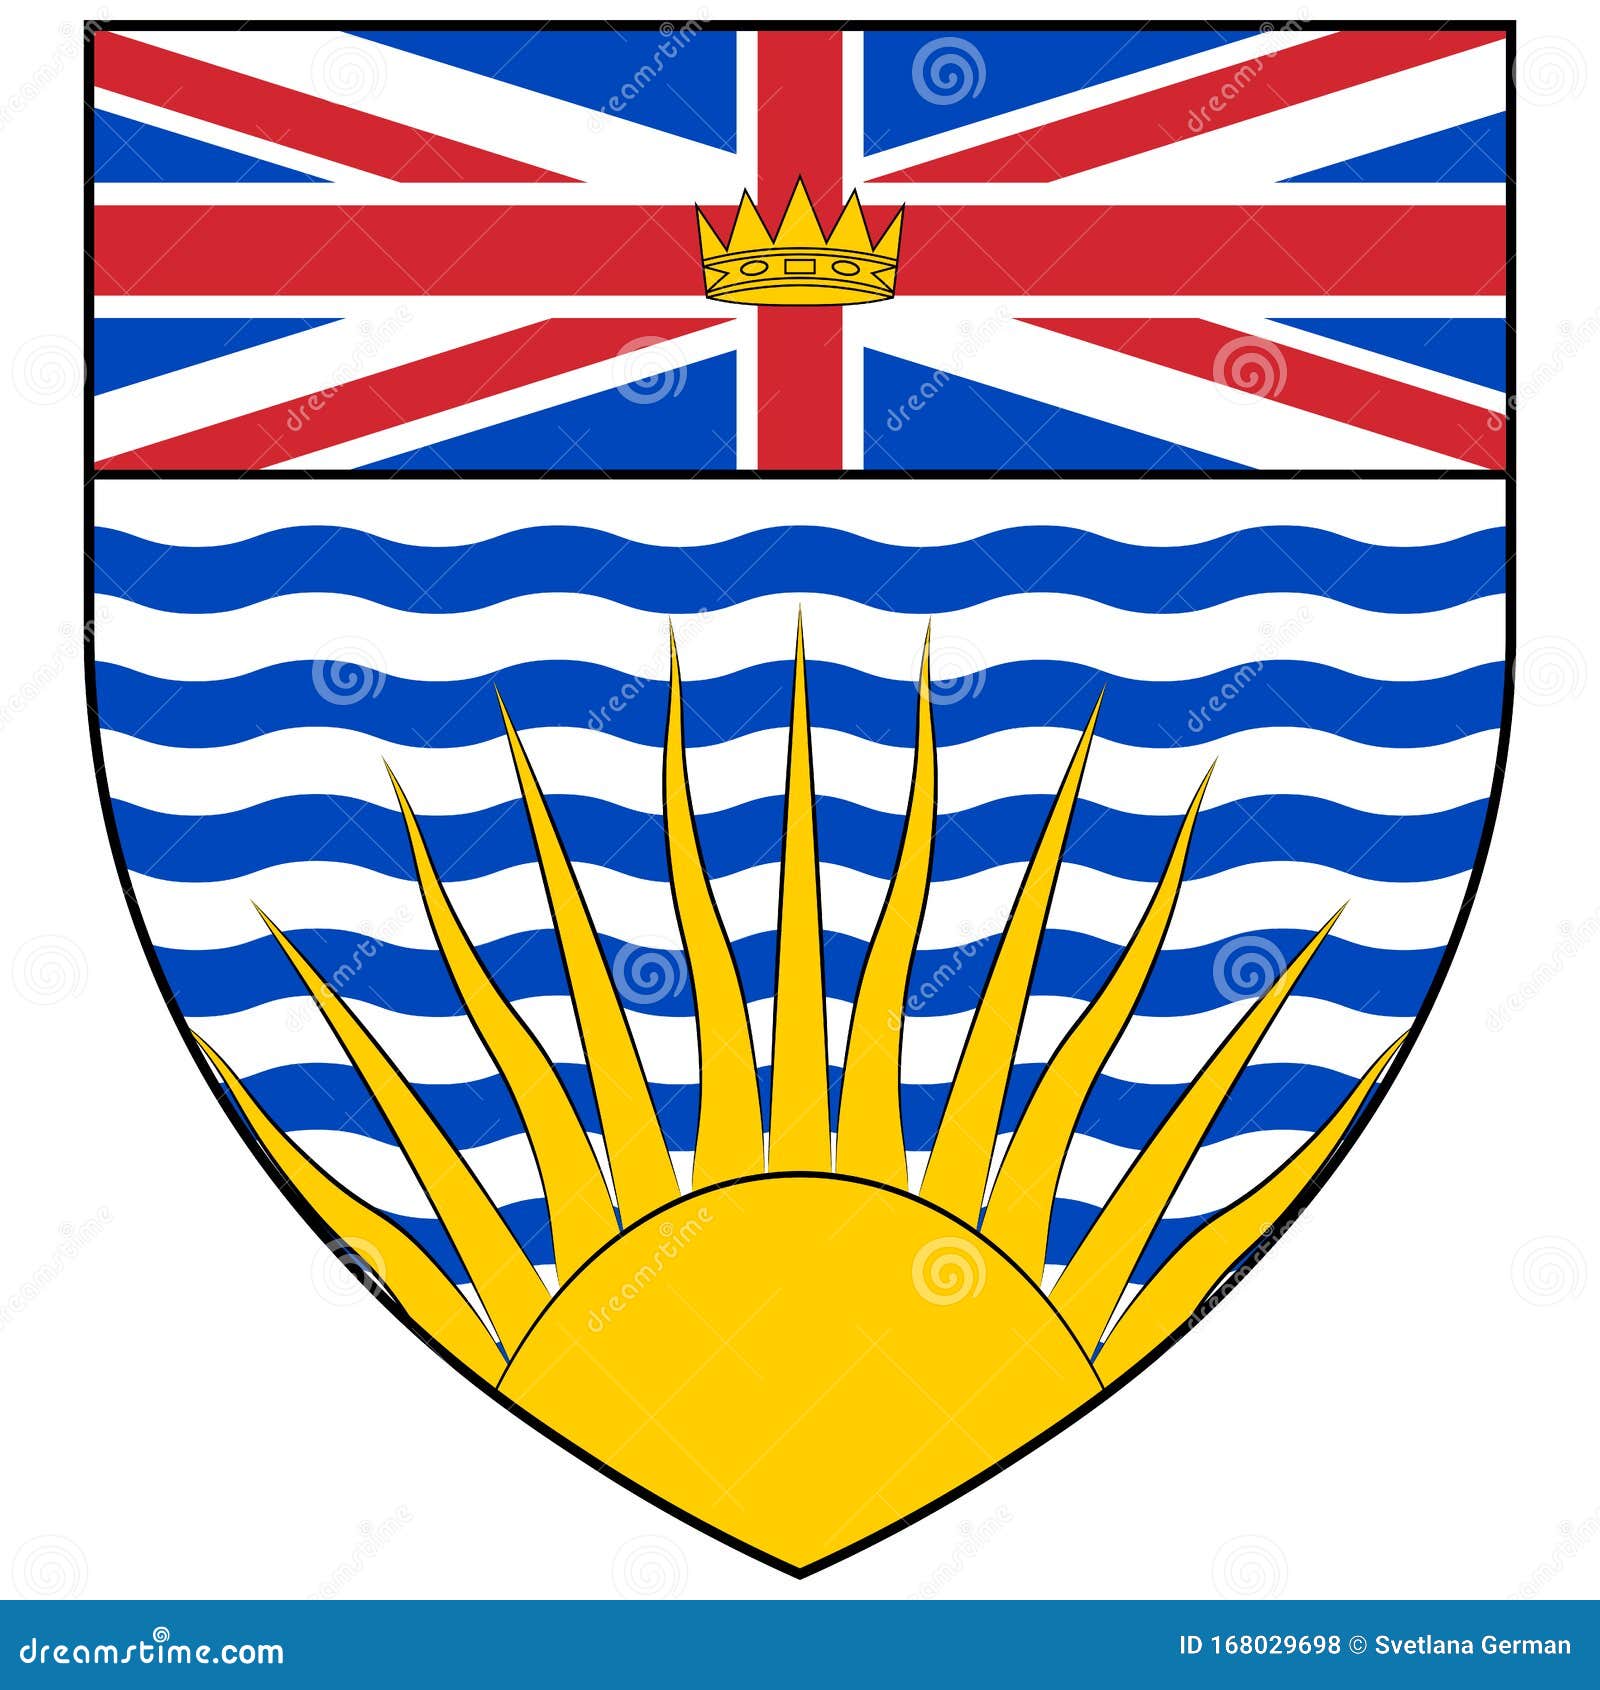 Coat of Arms of British Columbia in Canada Stock Vector - Illustration